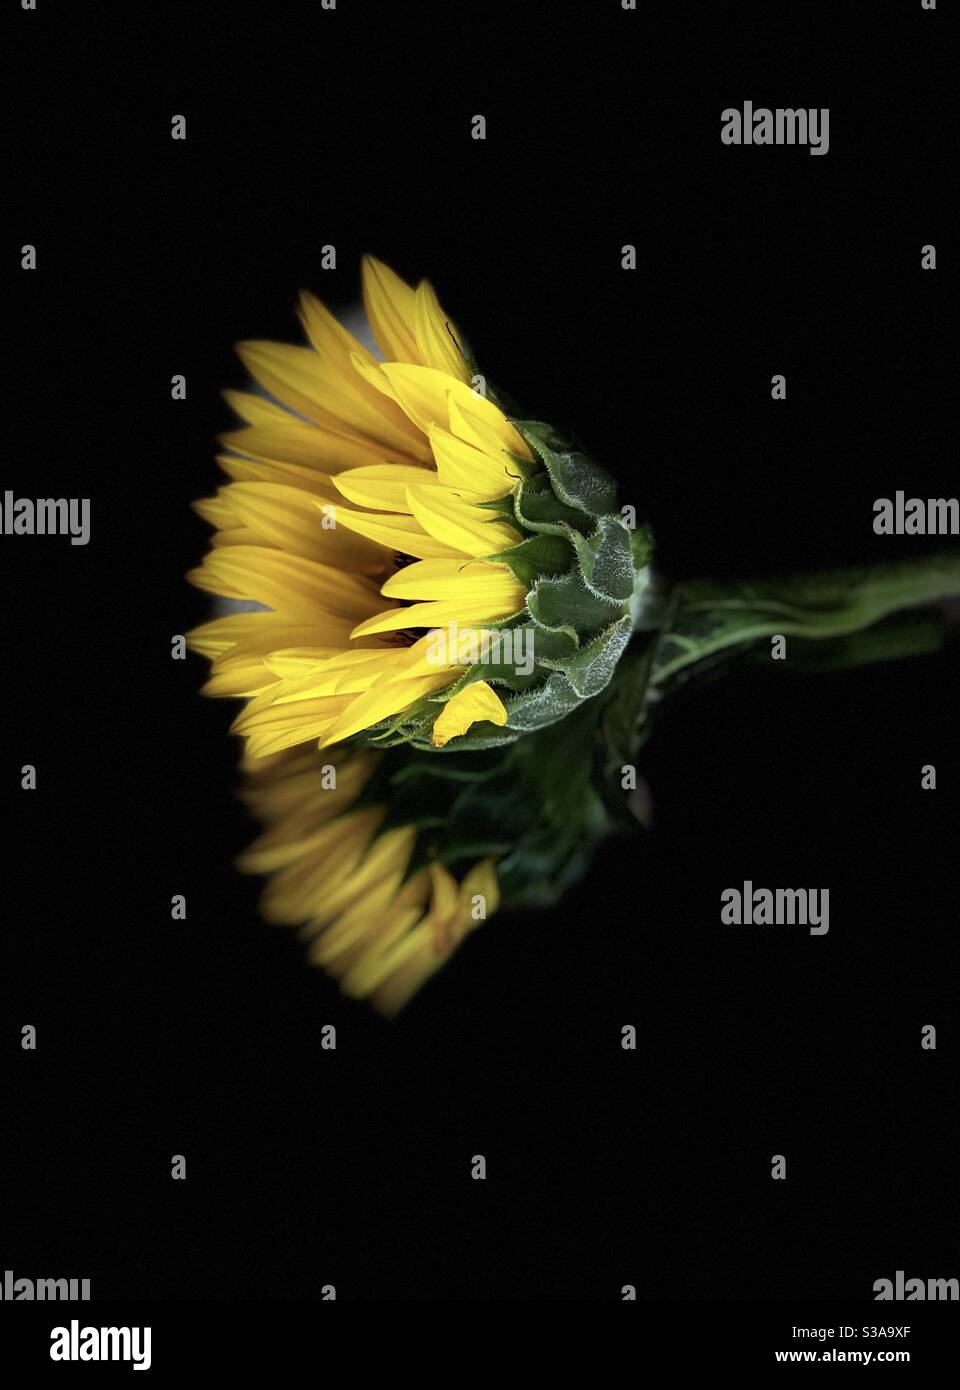 Single sunflower on solid black mirrored surface Stock Photo